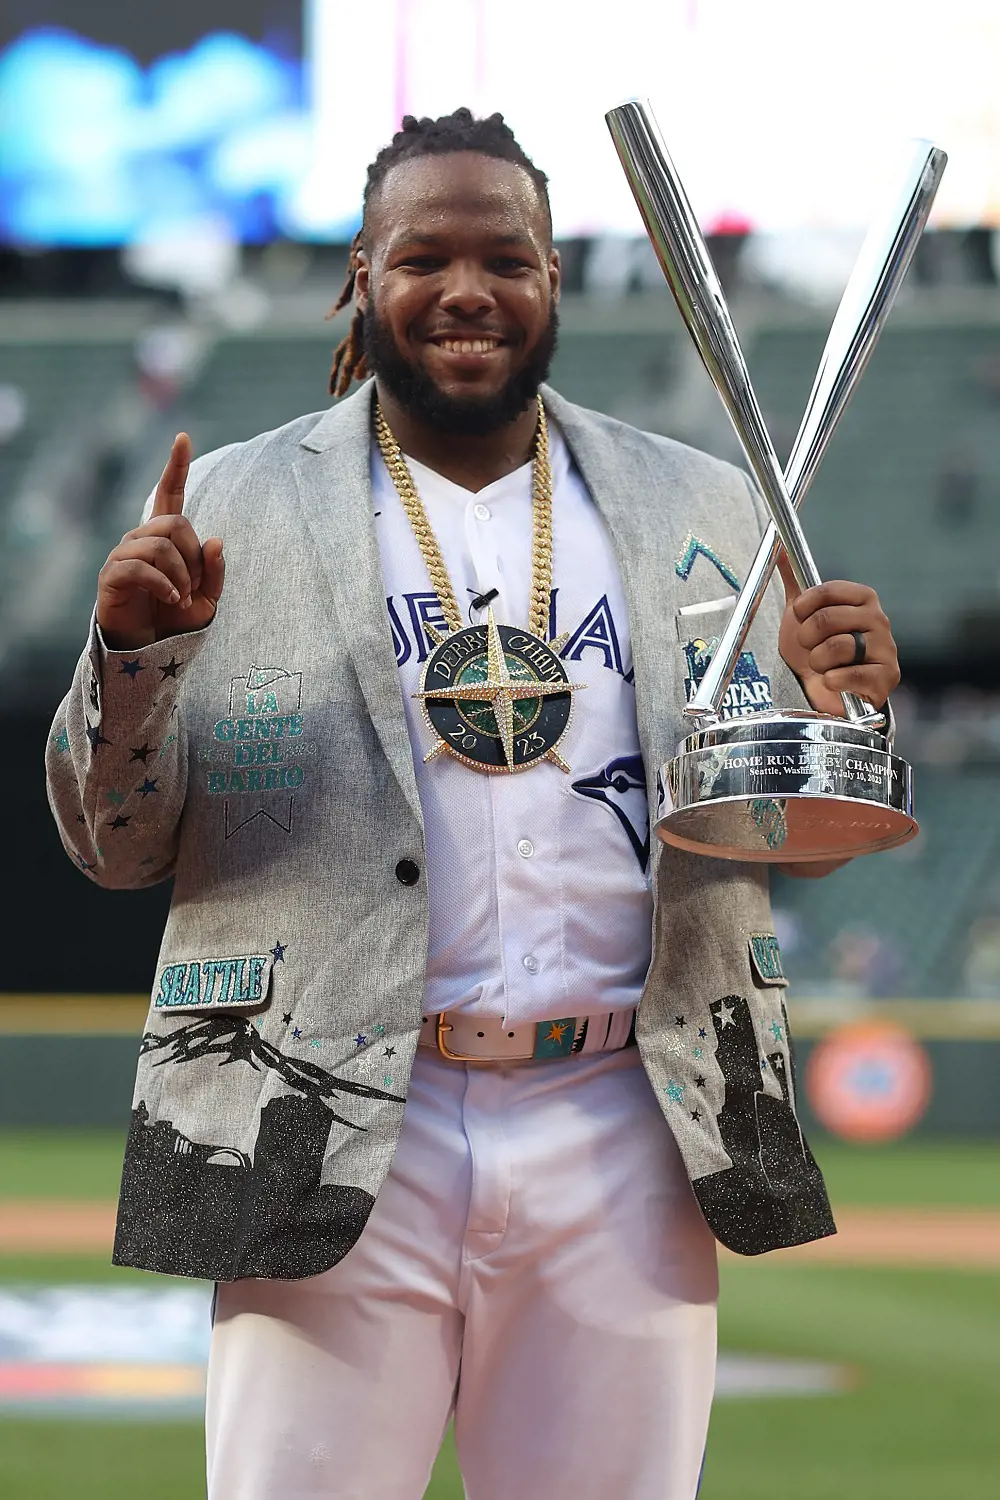 Guerrero Jr. celebrates after winning the 2023 MLB Home Run Derby.